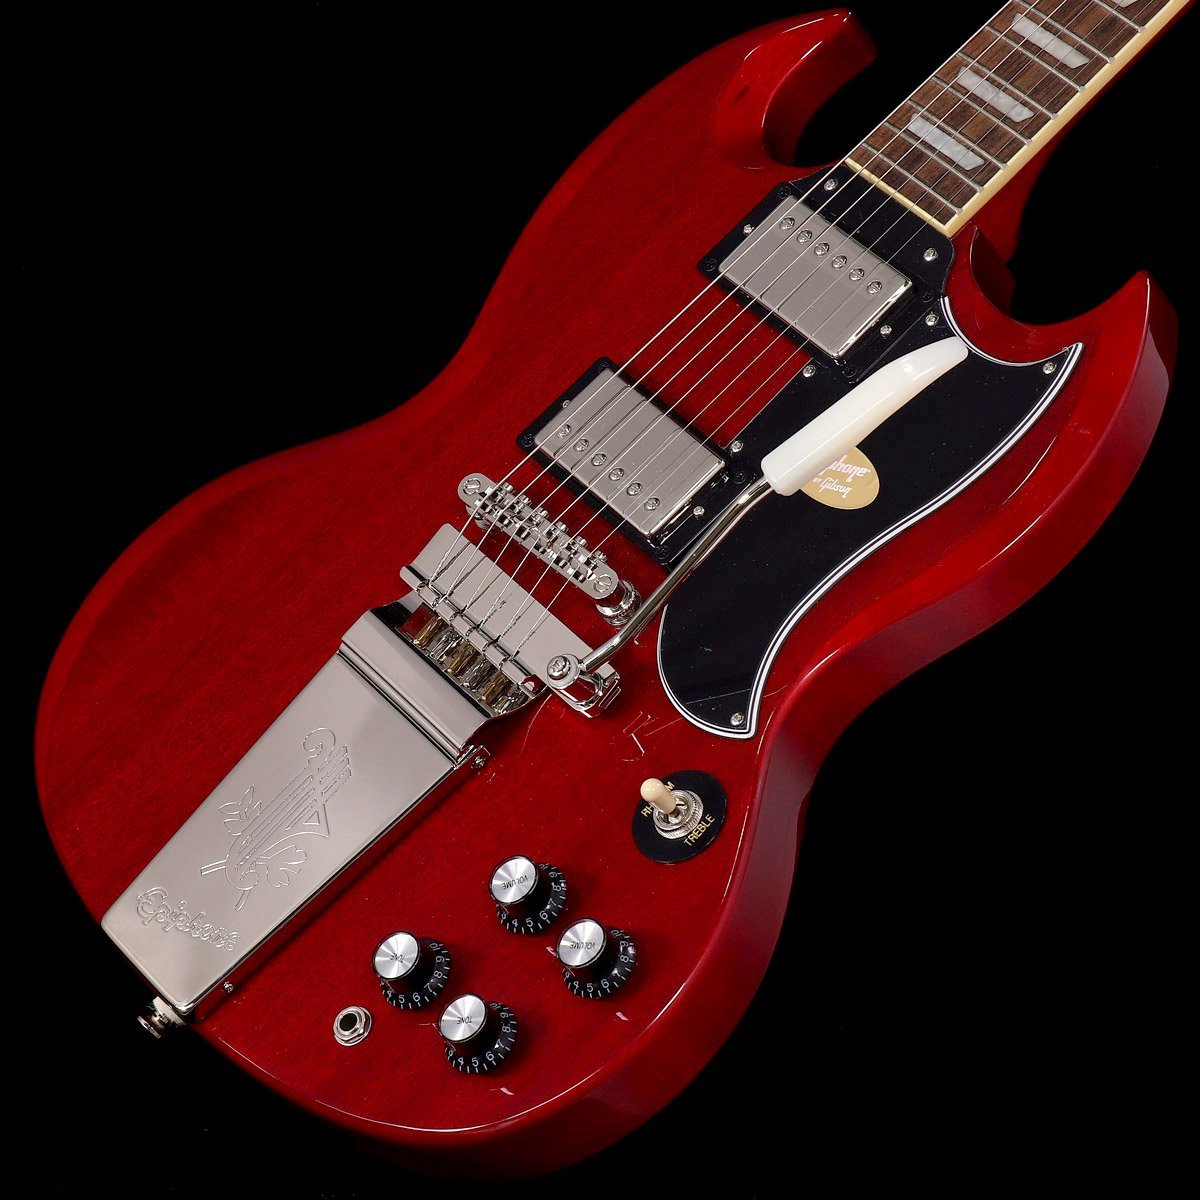 Epiphone Inspired by Gibson SG Standard 60s Maestro Vibrola ...